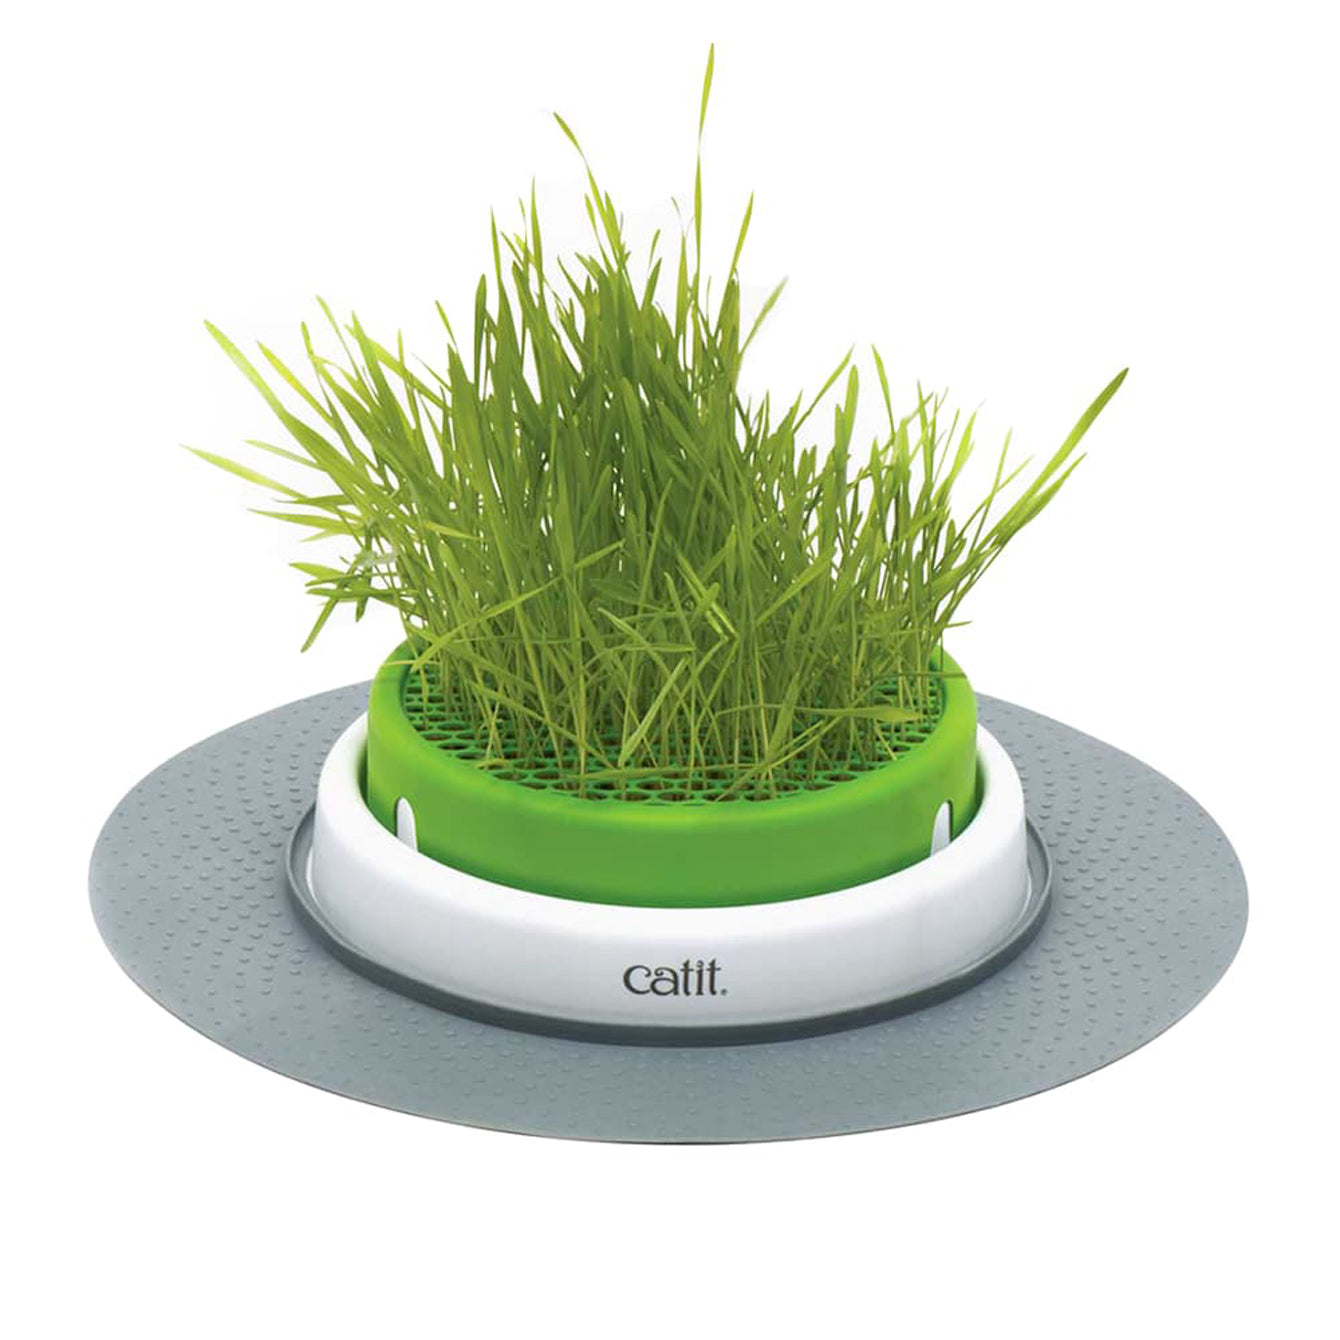 Catit Senses 2.0 Grass Planter to help with cat digestion